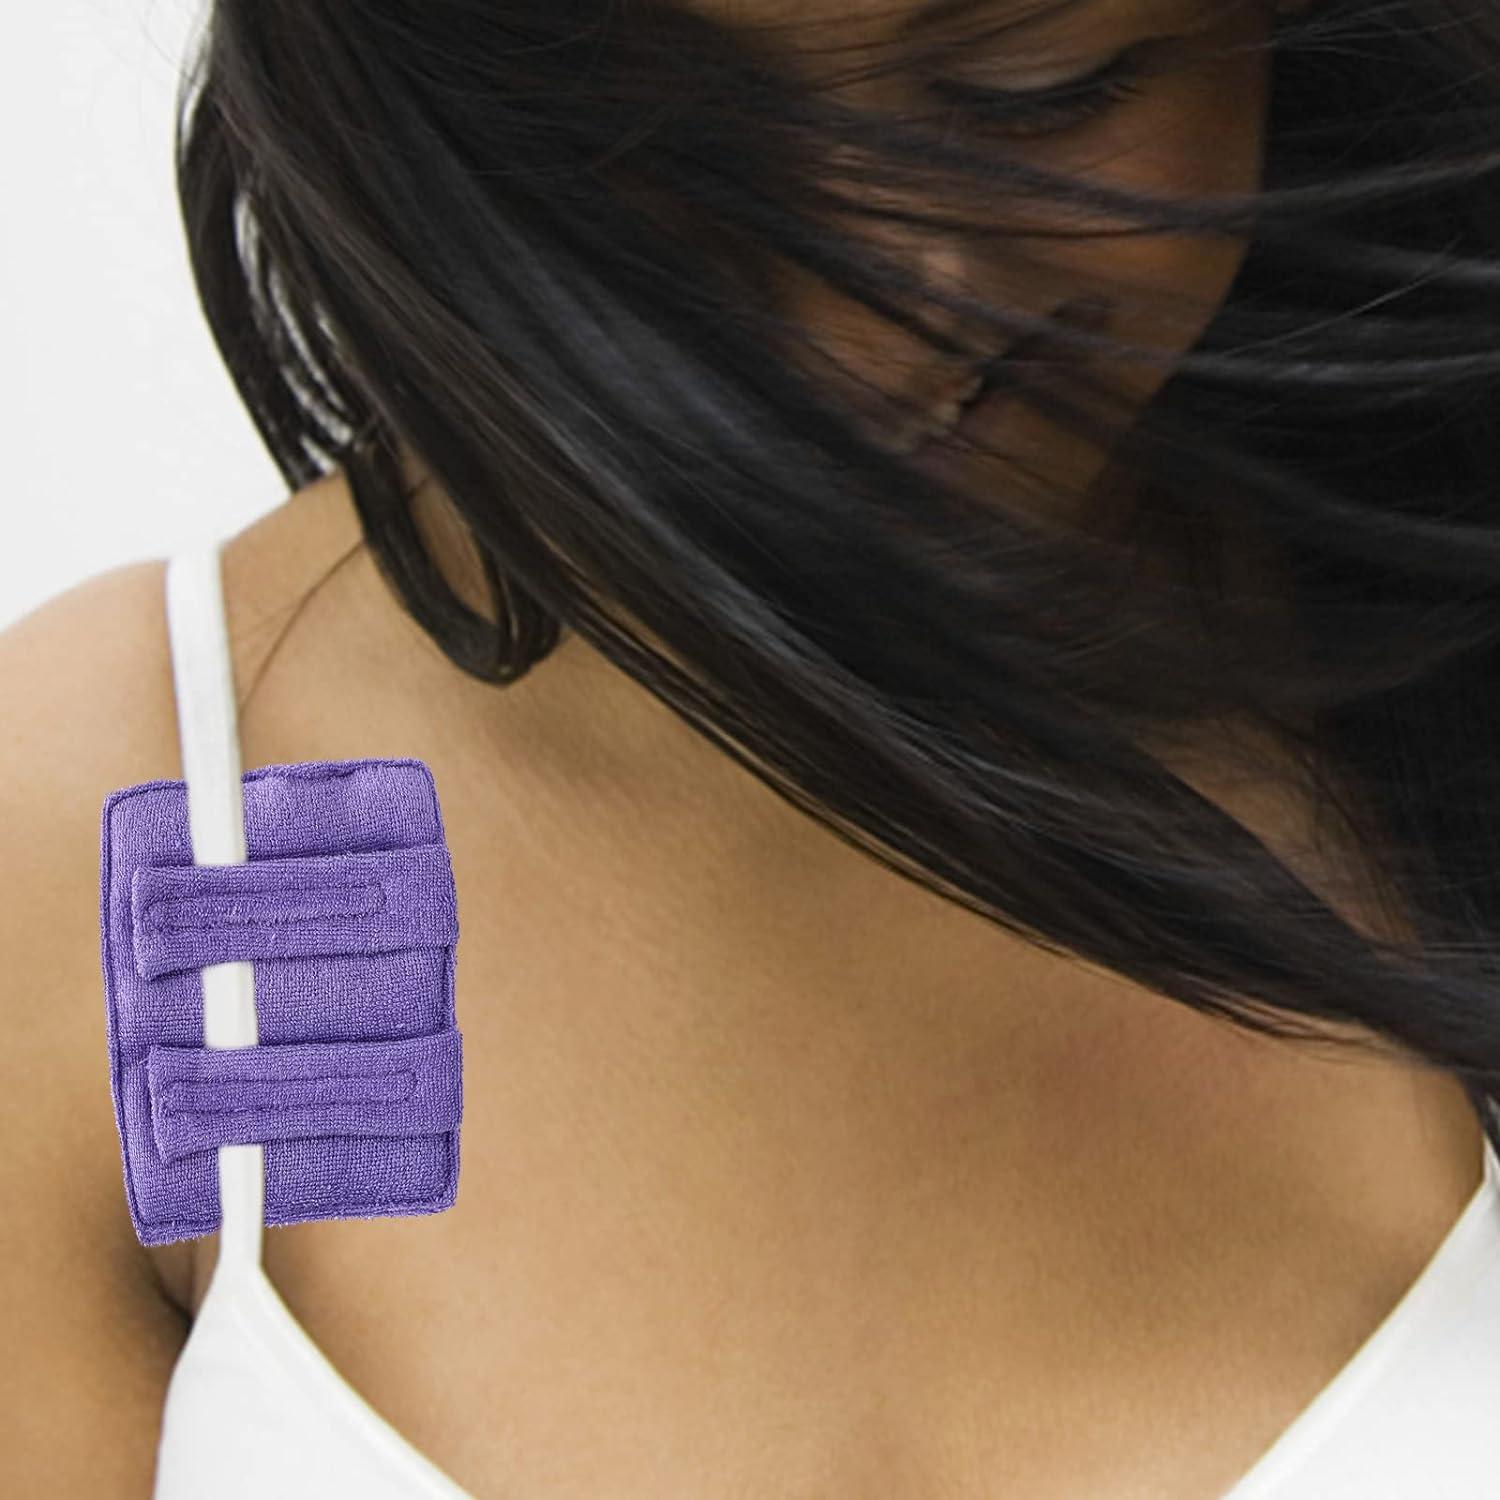 Bra Strap Pad for Pacemakers or Chemo Ports